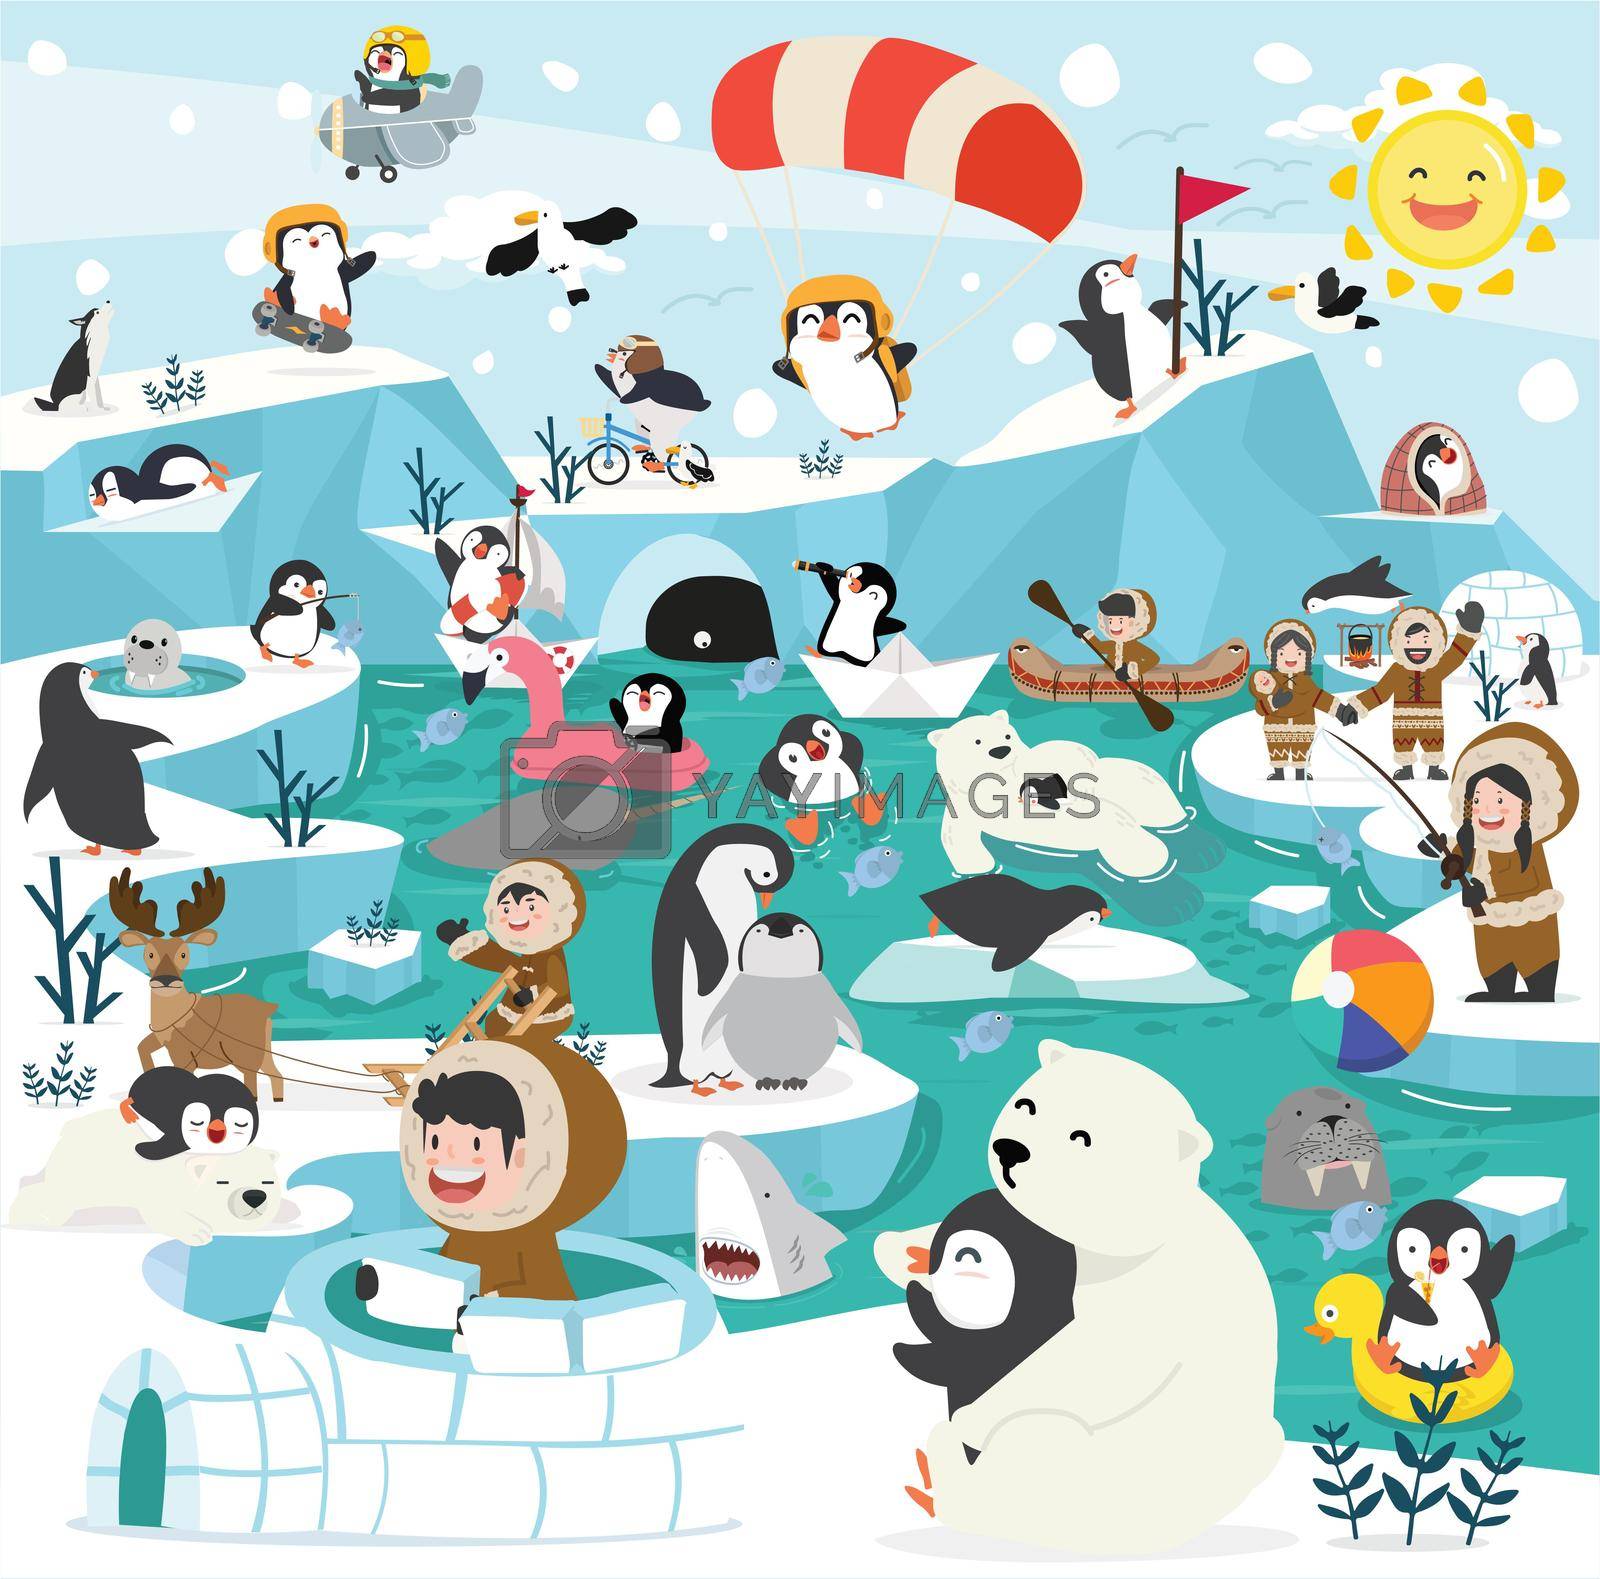 Royalty free image of North pole winter arctic animals  icebergs vector by focus_bell